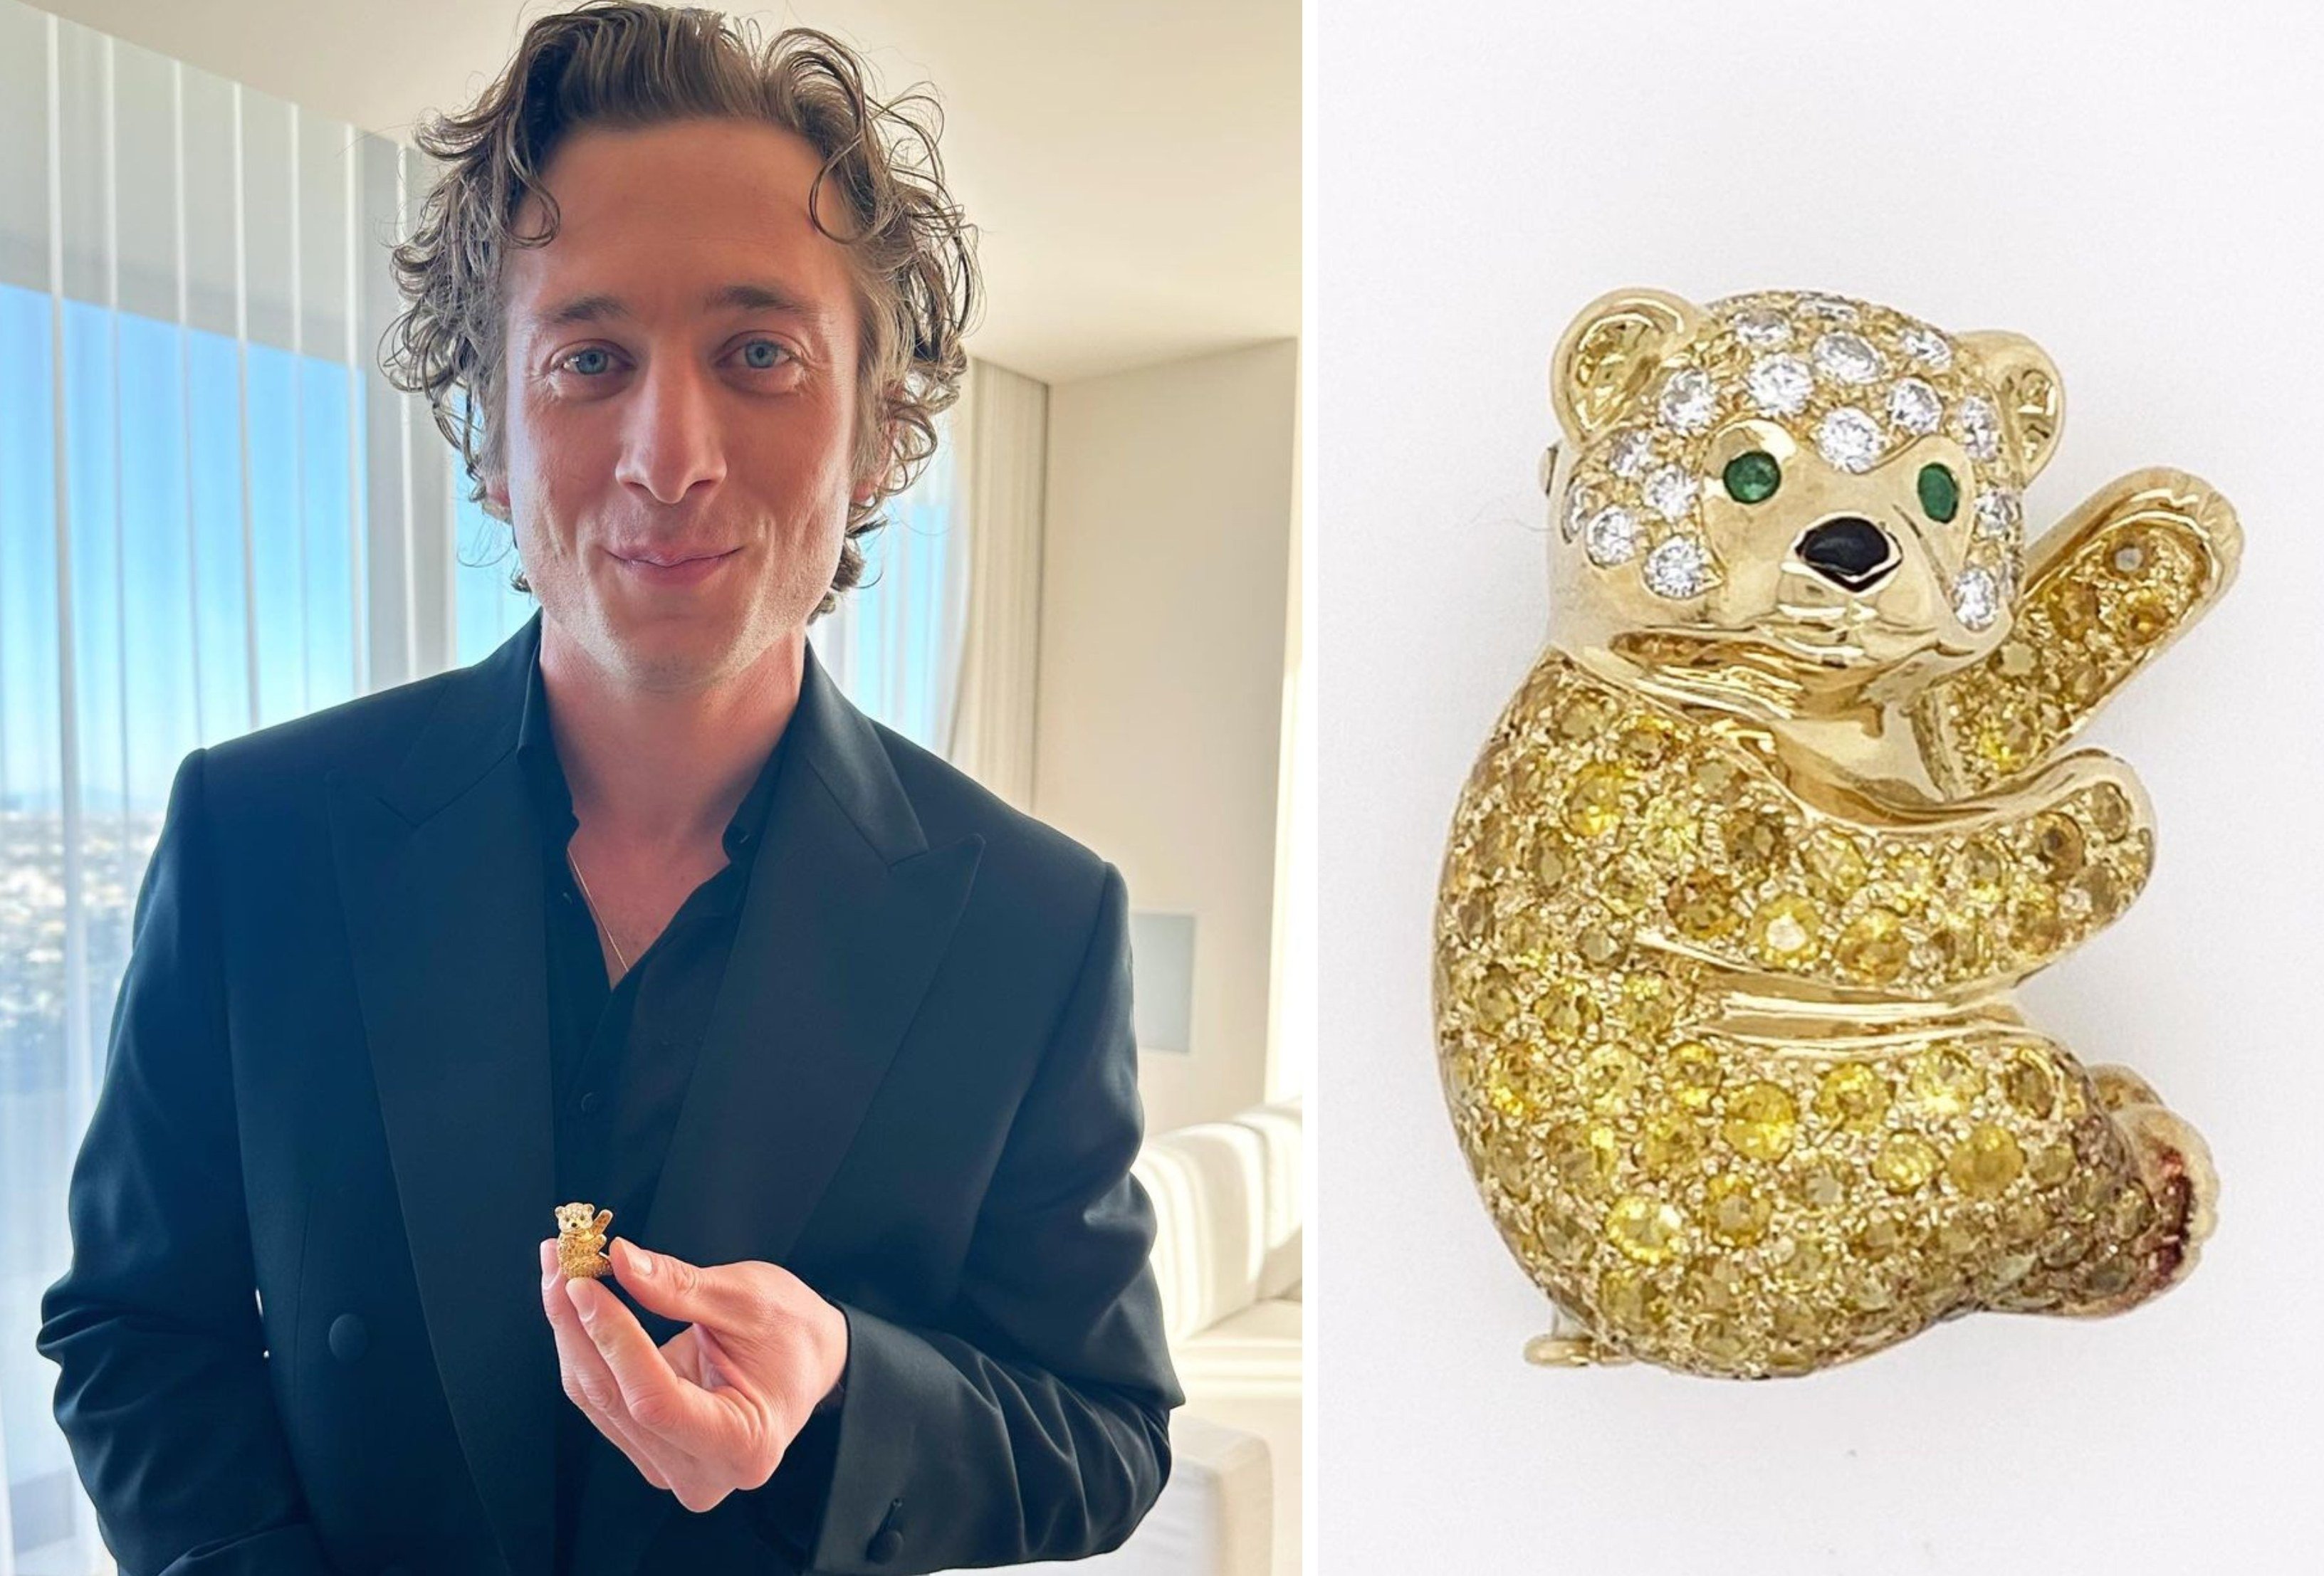 The vintage bear brooch by French jeweller Van Cleef & Arpels carried by Jeremy Allen White at the Golden Globes, where he won best actor in a TV series. Photos: Handout